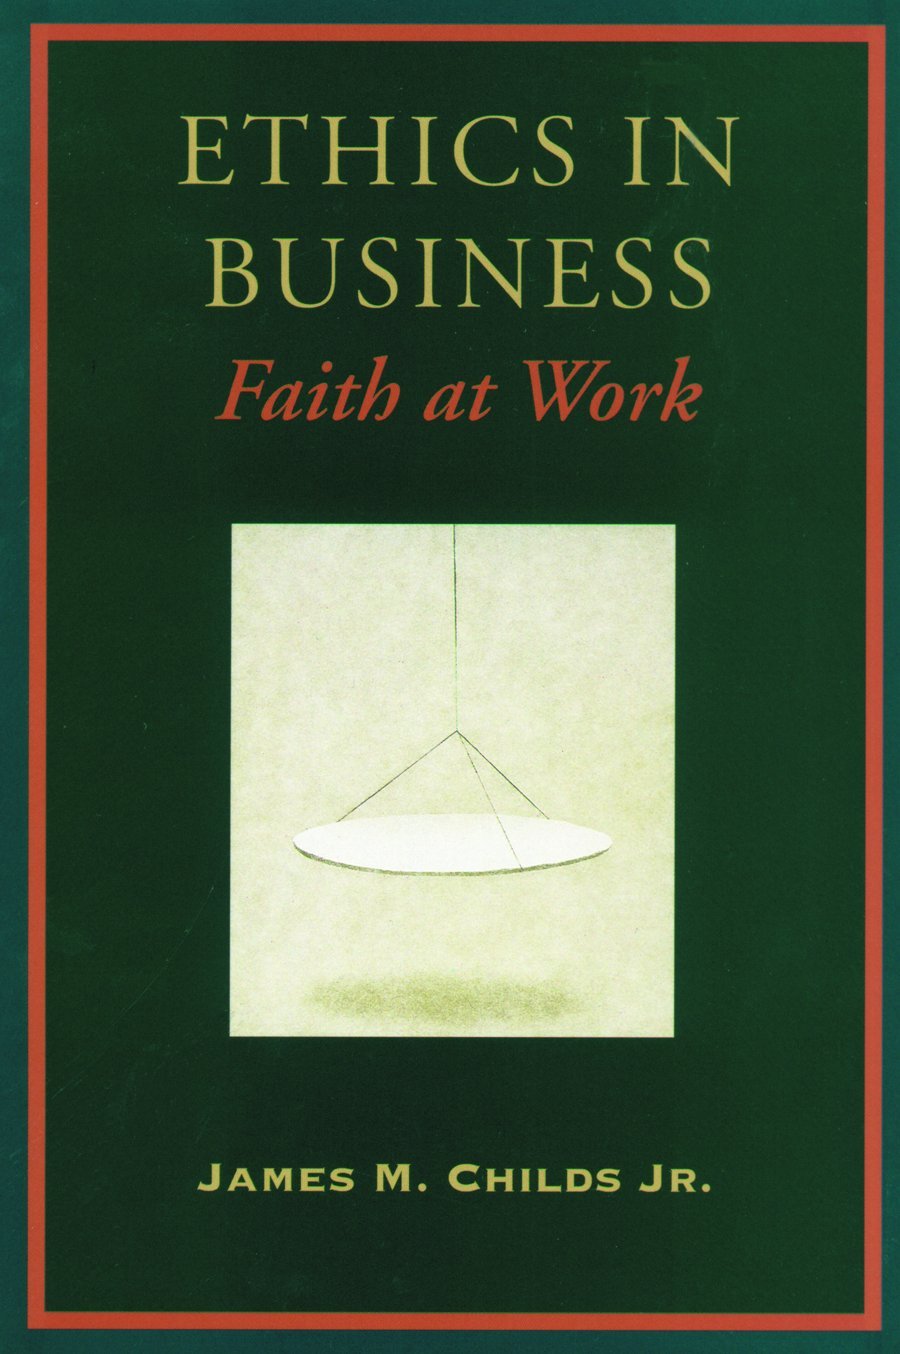 Ethics in Business: Faith at Work